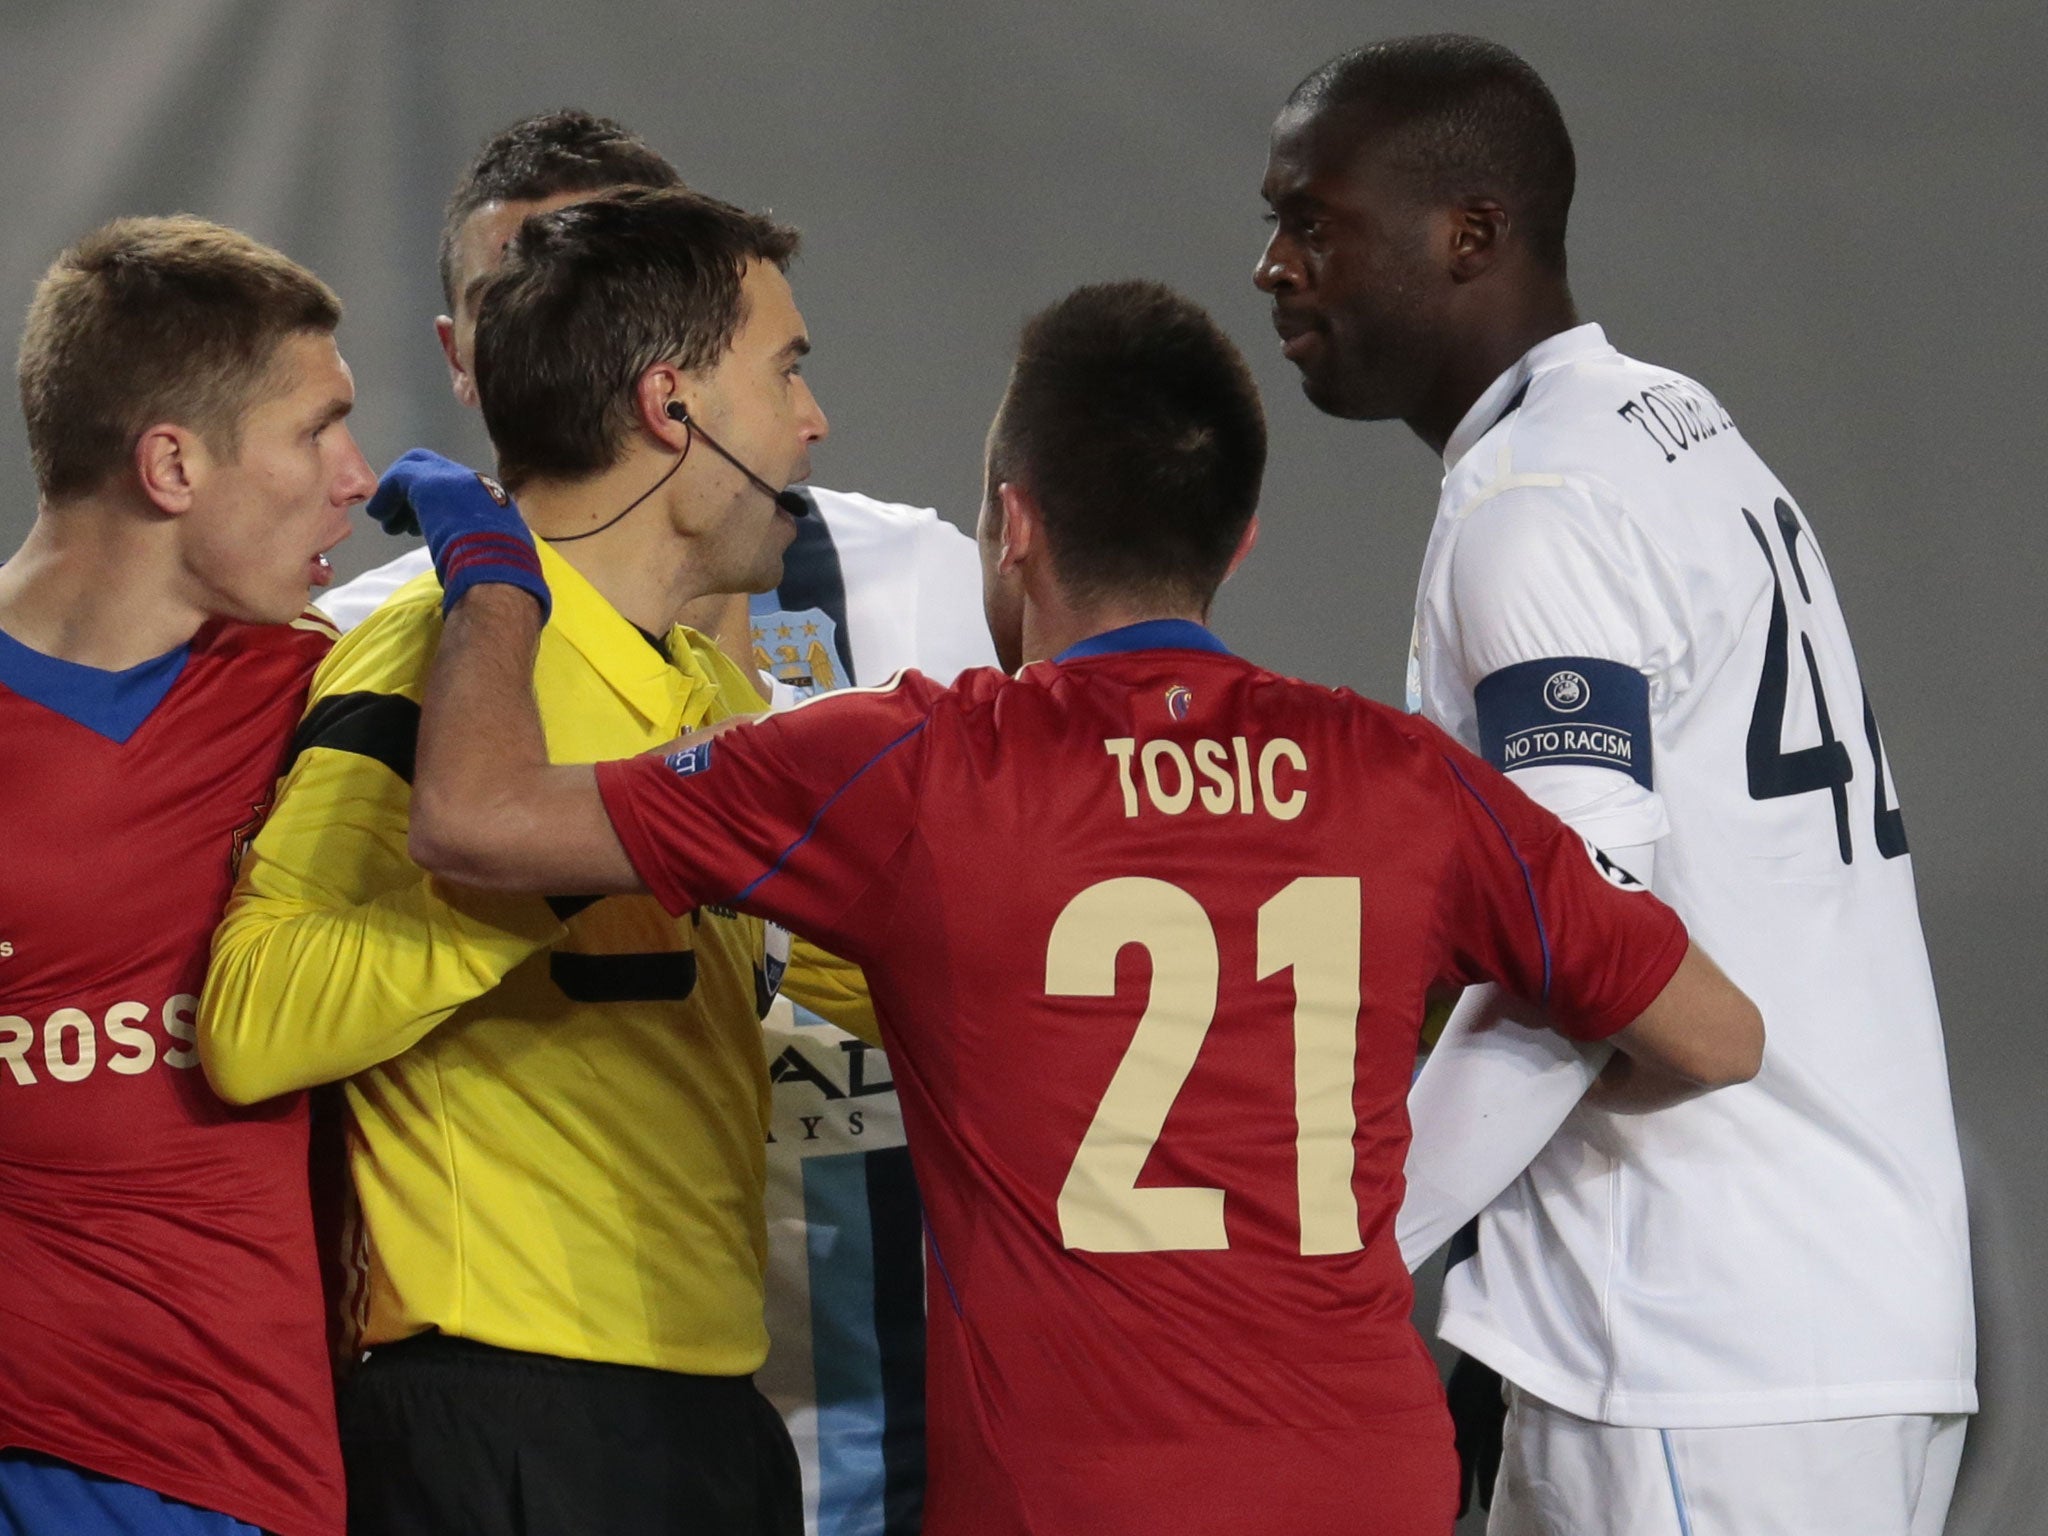 Yaya Touré tells the referee about the chanting